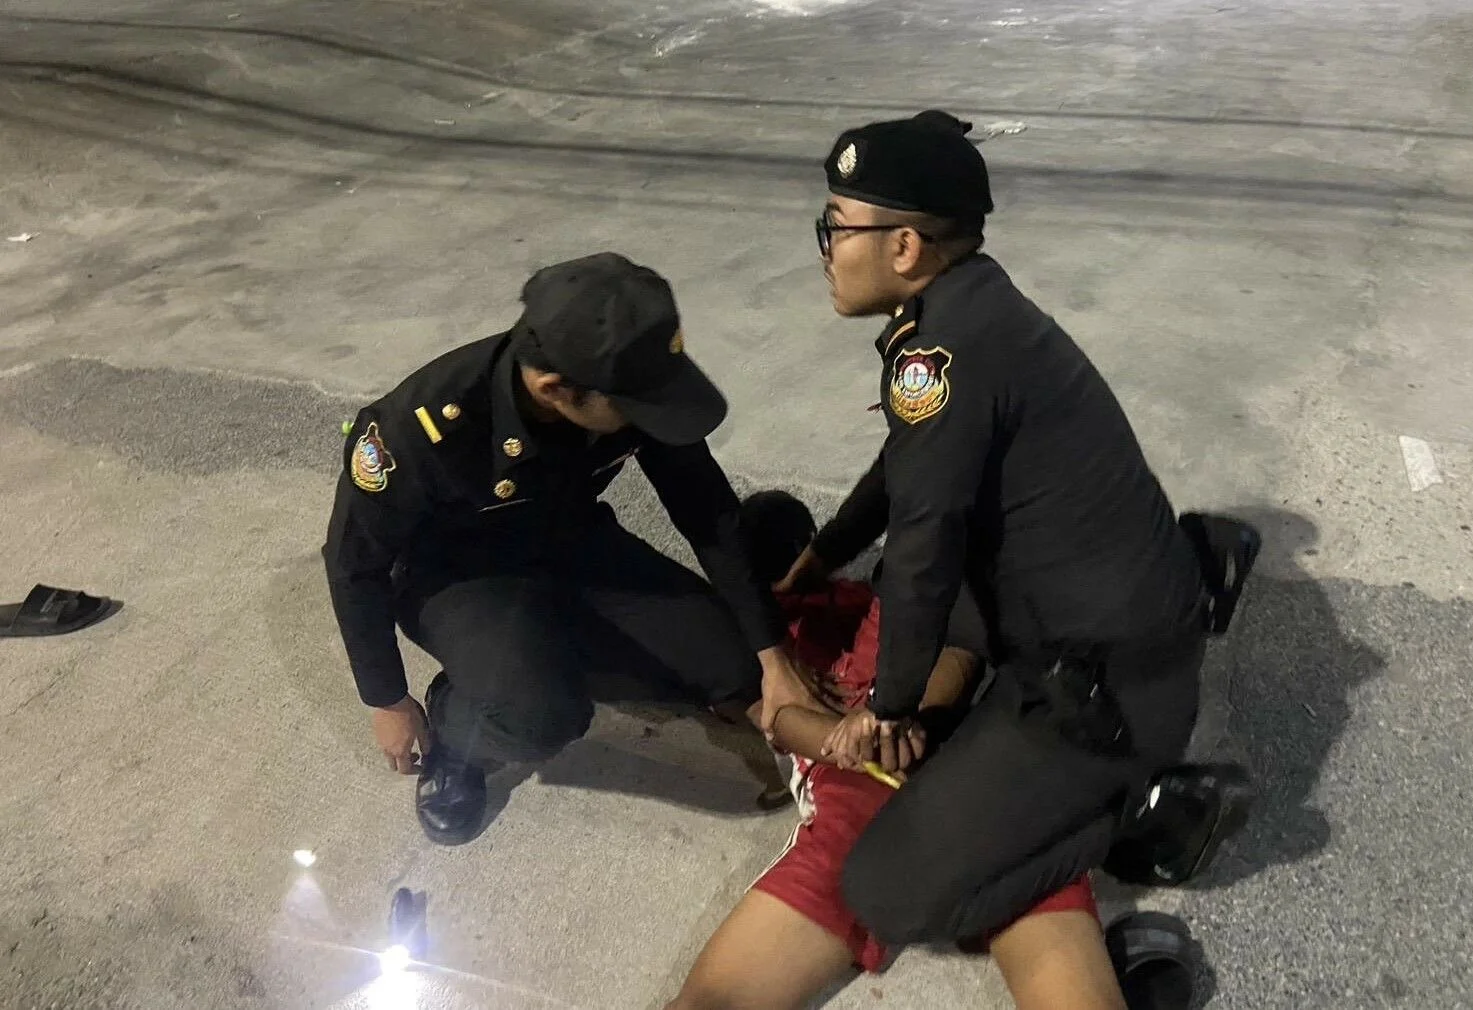 Thai national arrested in Pattaya